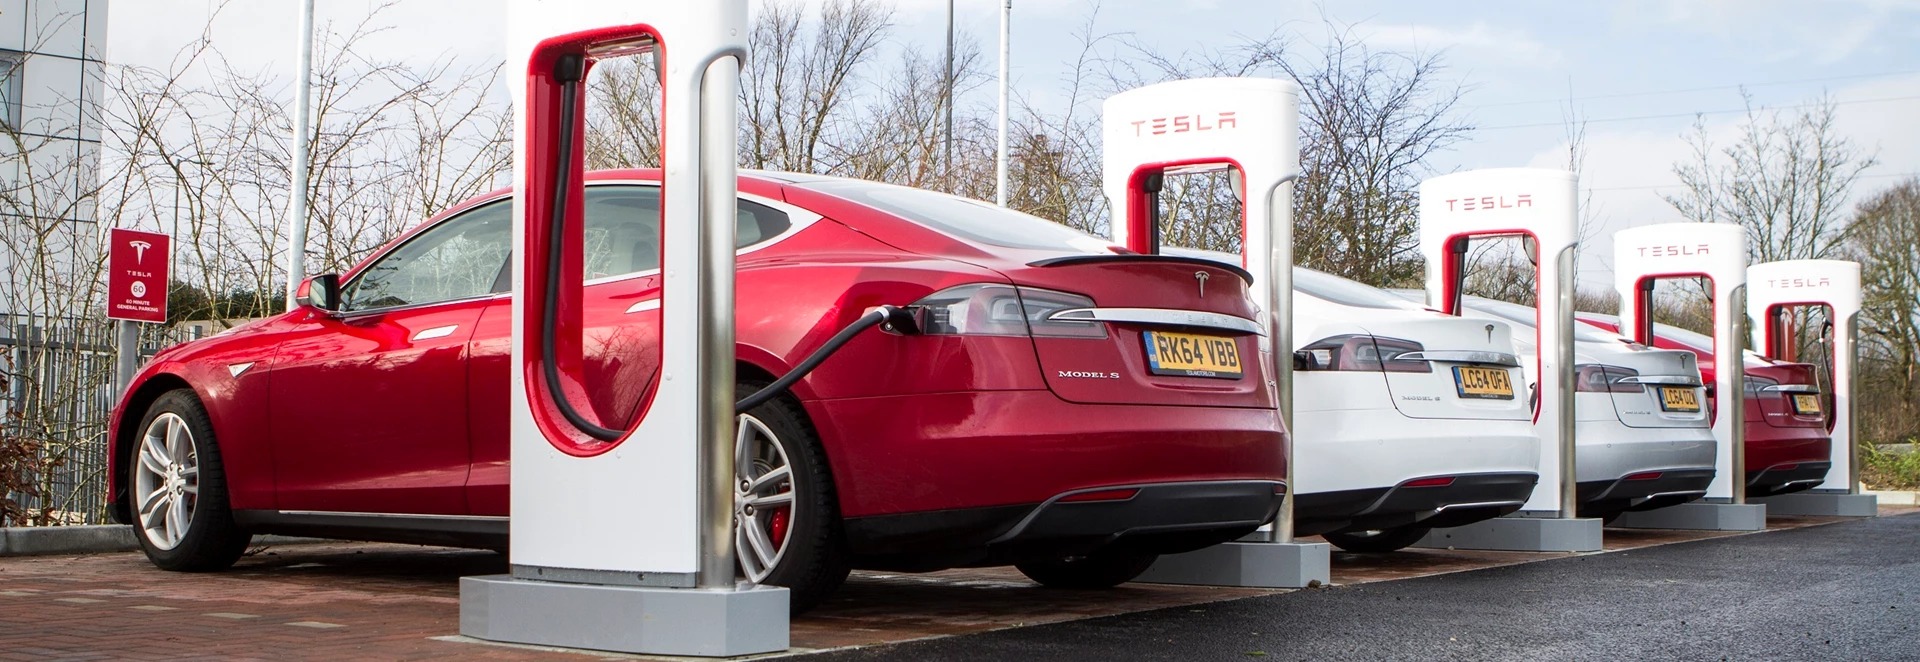 Best electric car charging providers named 2020 